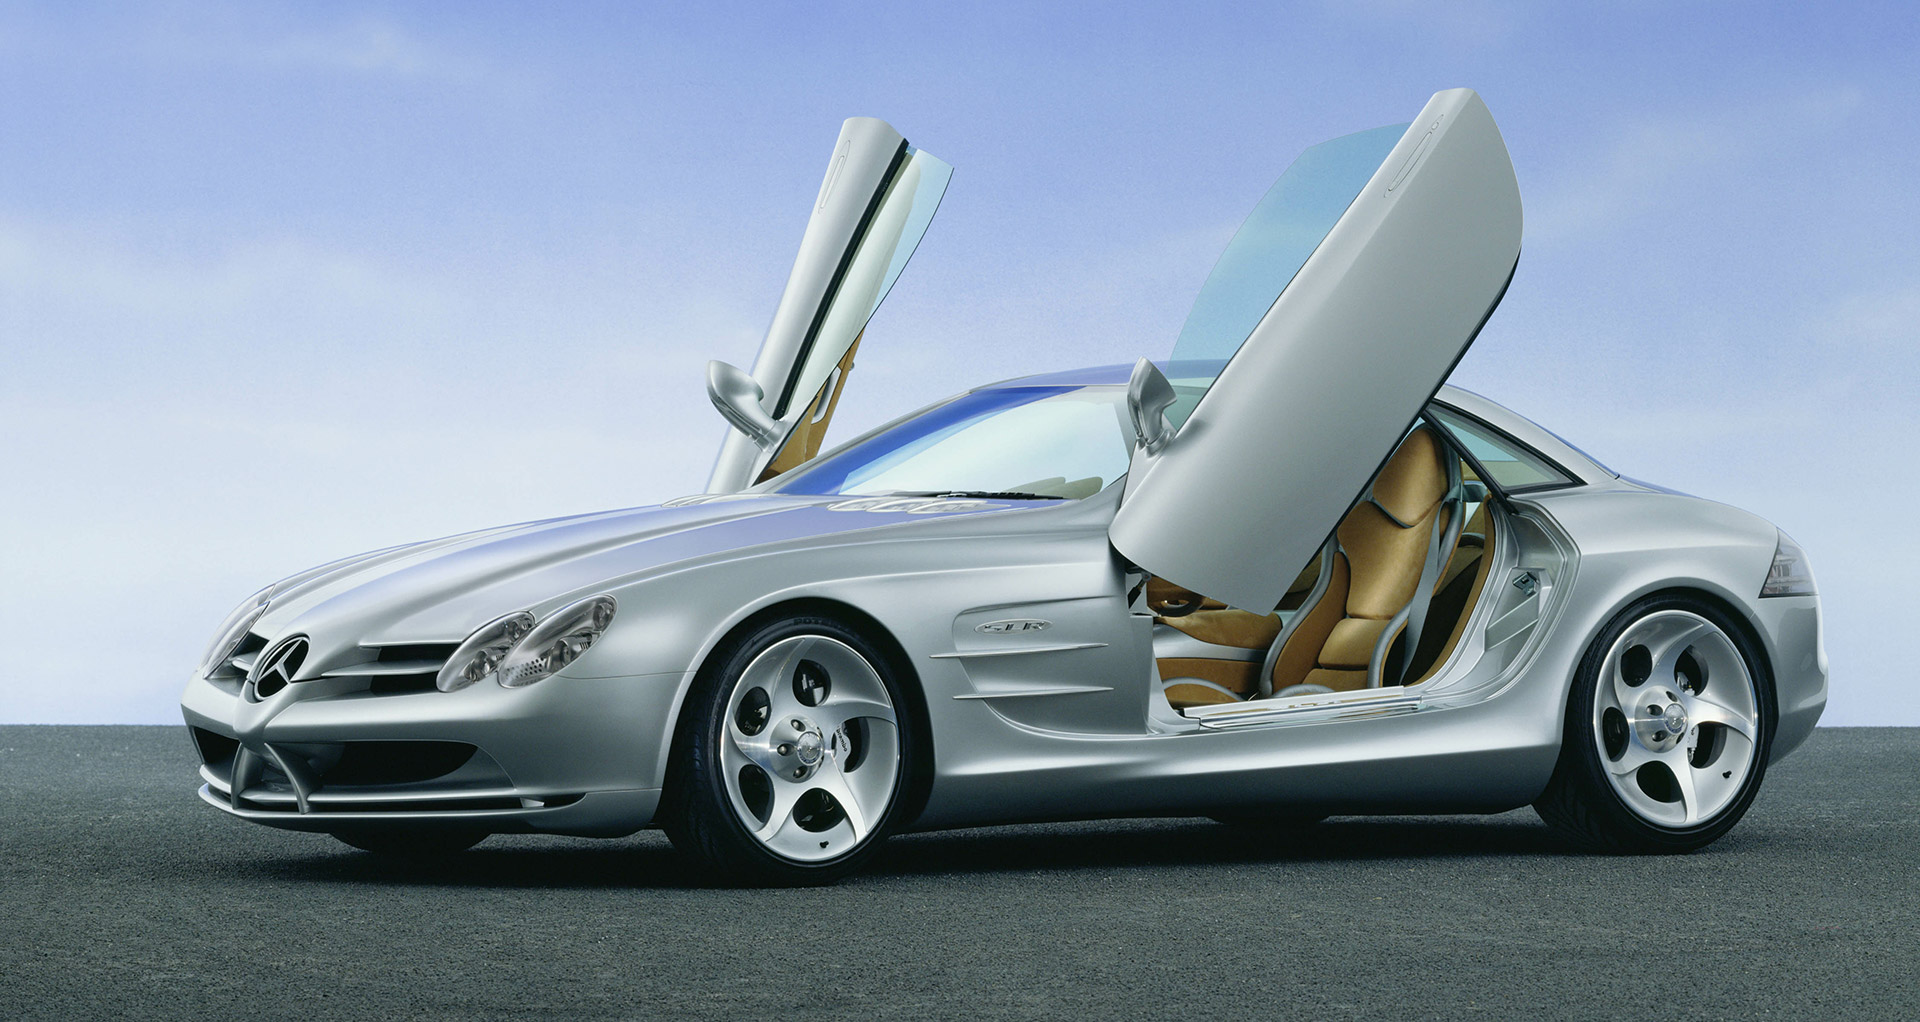 The Vision SLR was the concept that turned into the Mercedes-Benz SLR McLaren. 